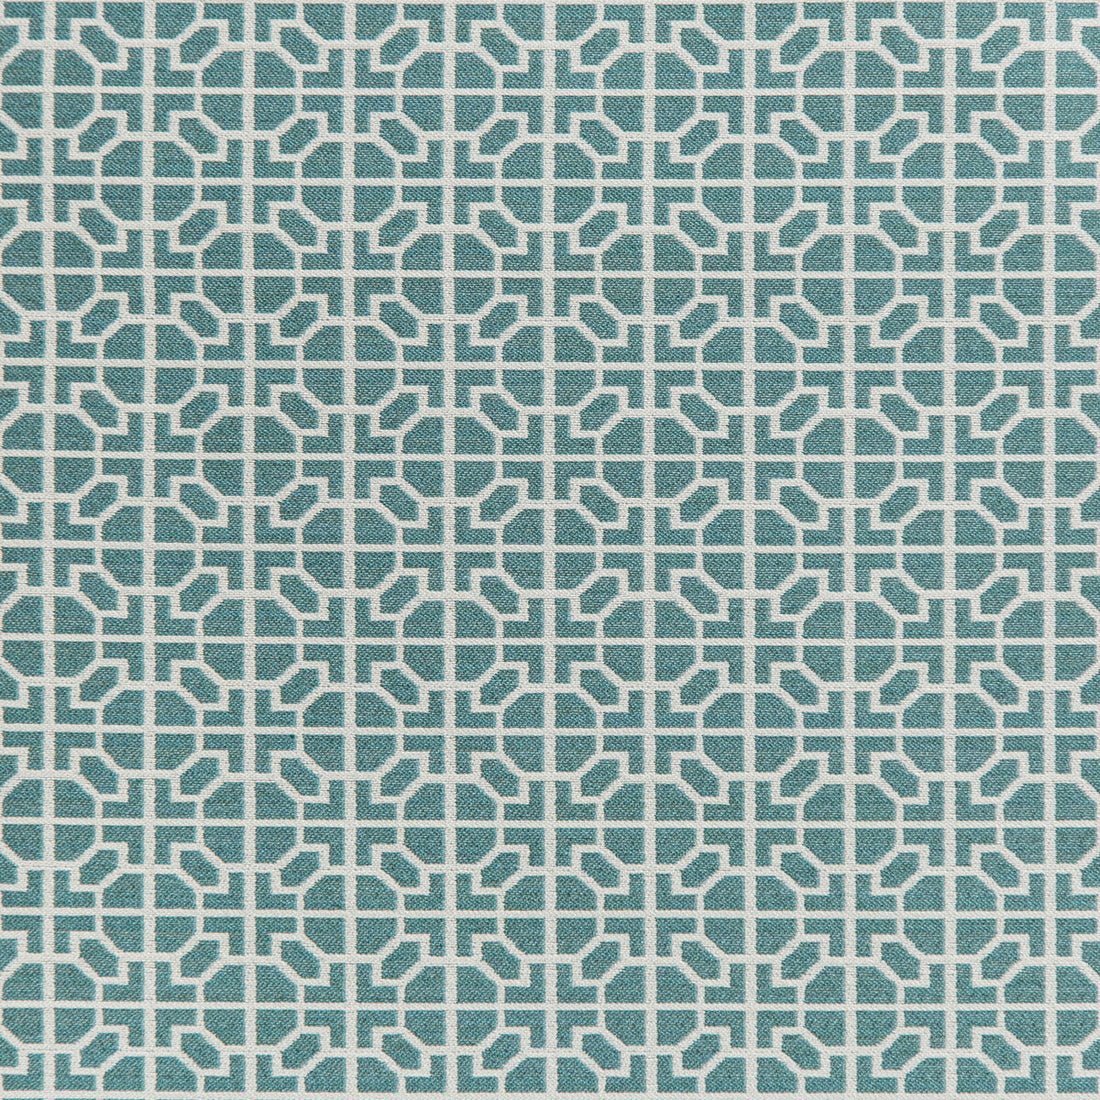 Raia fabric in surf color - pattern 35820.13.0 - by Kravet Design in the Indoor / Outdoor collection